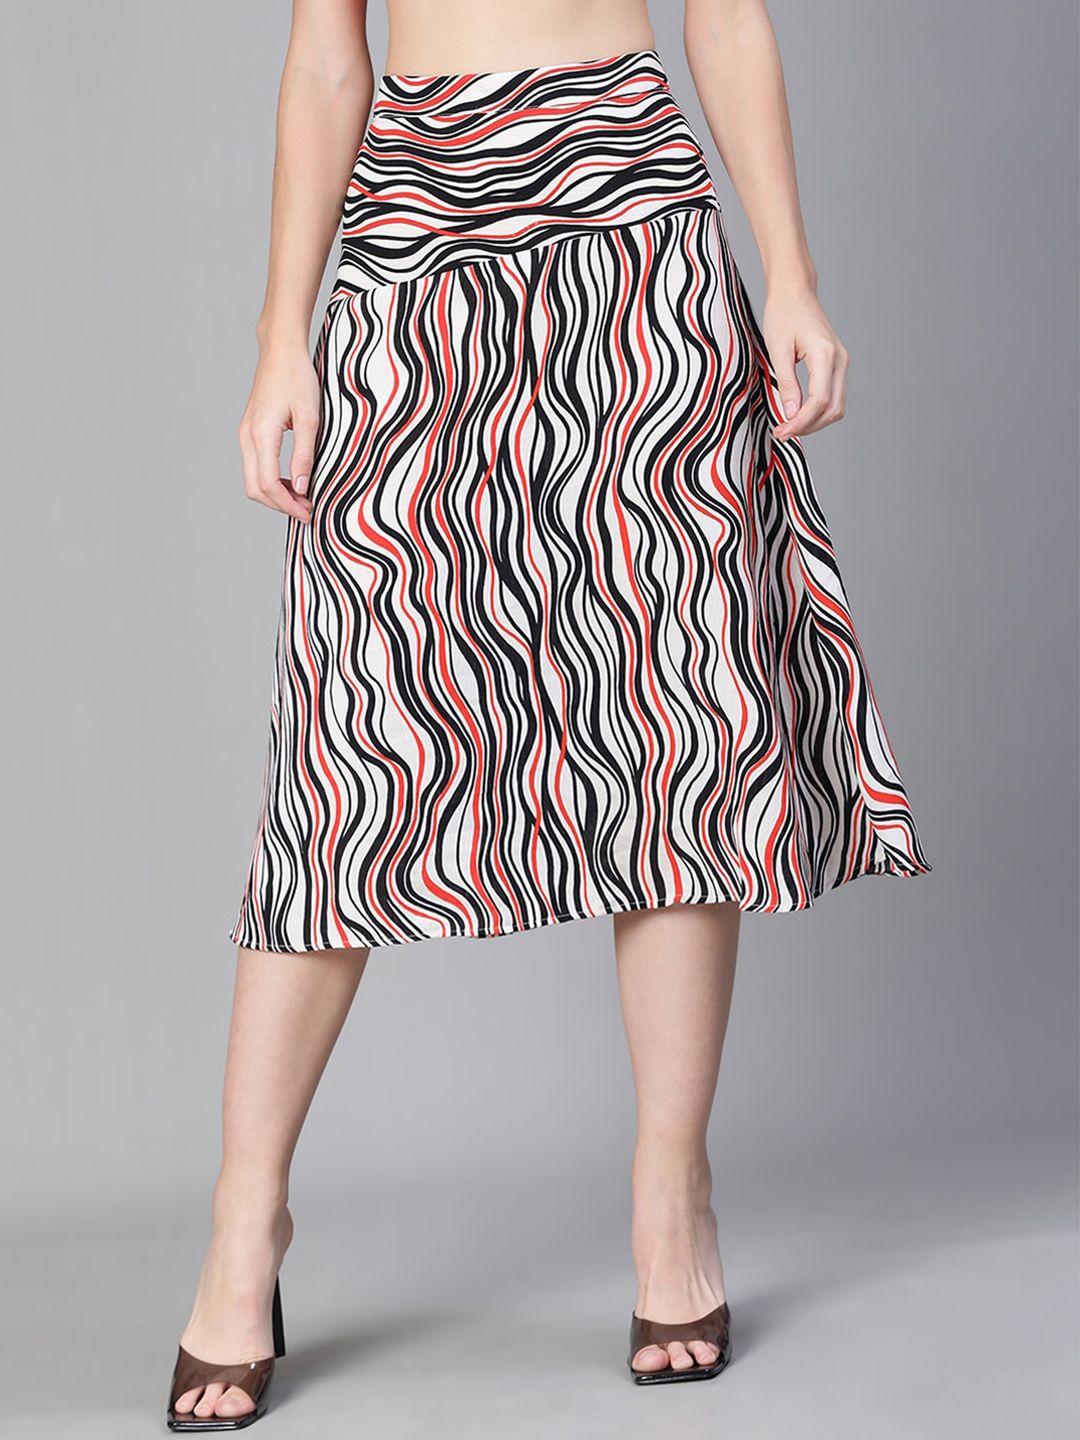 Oxolloxo Layered Printed A-Line Flared Skirt